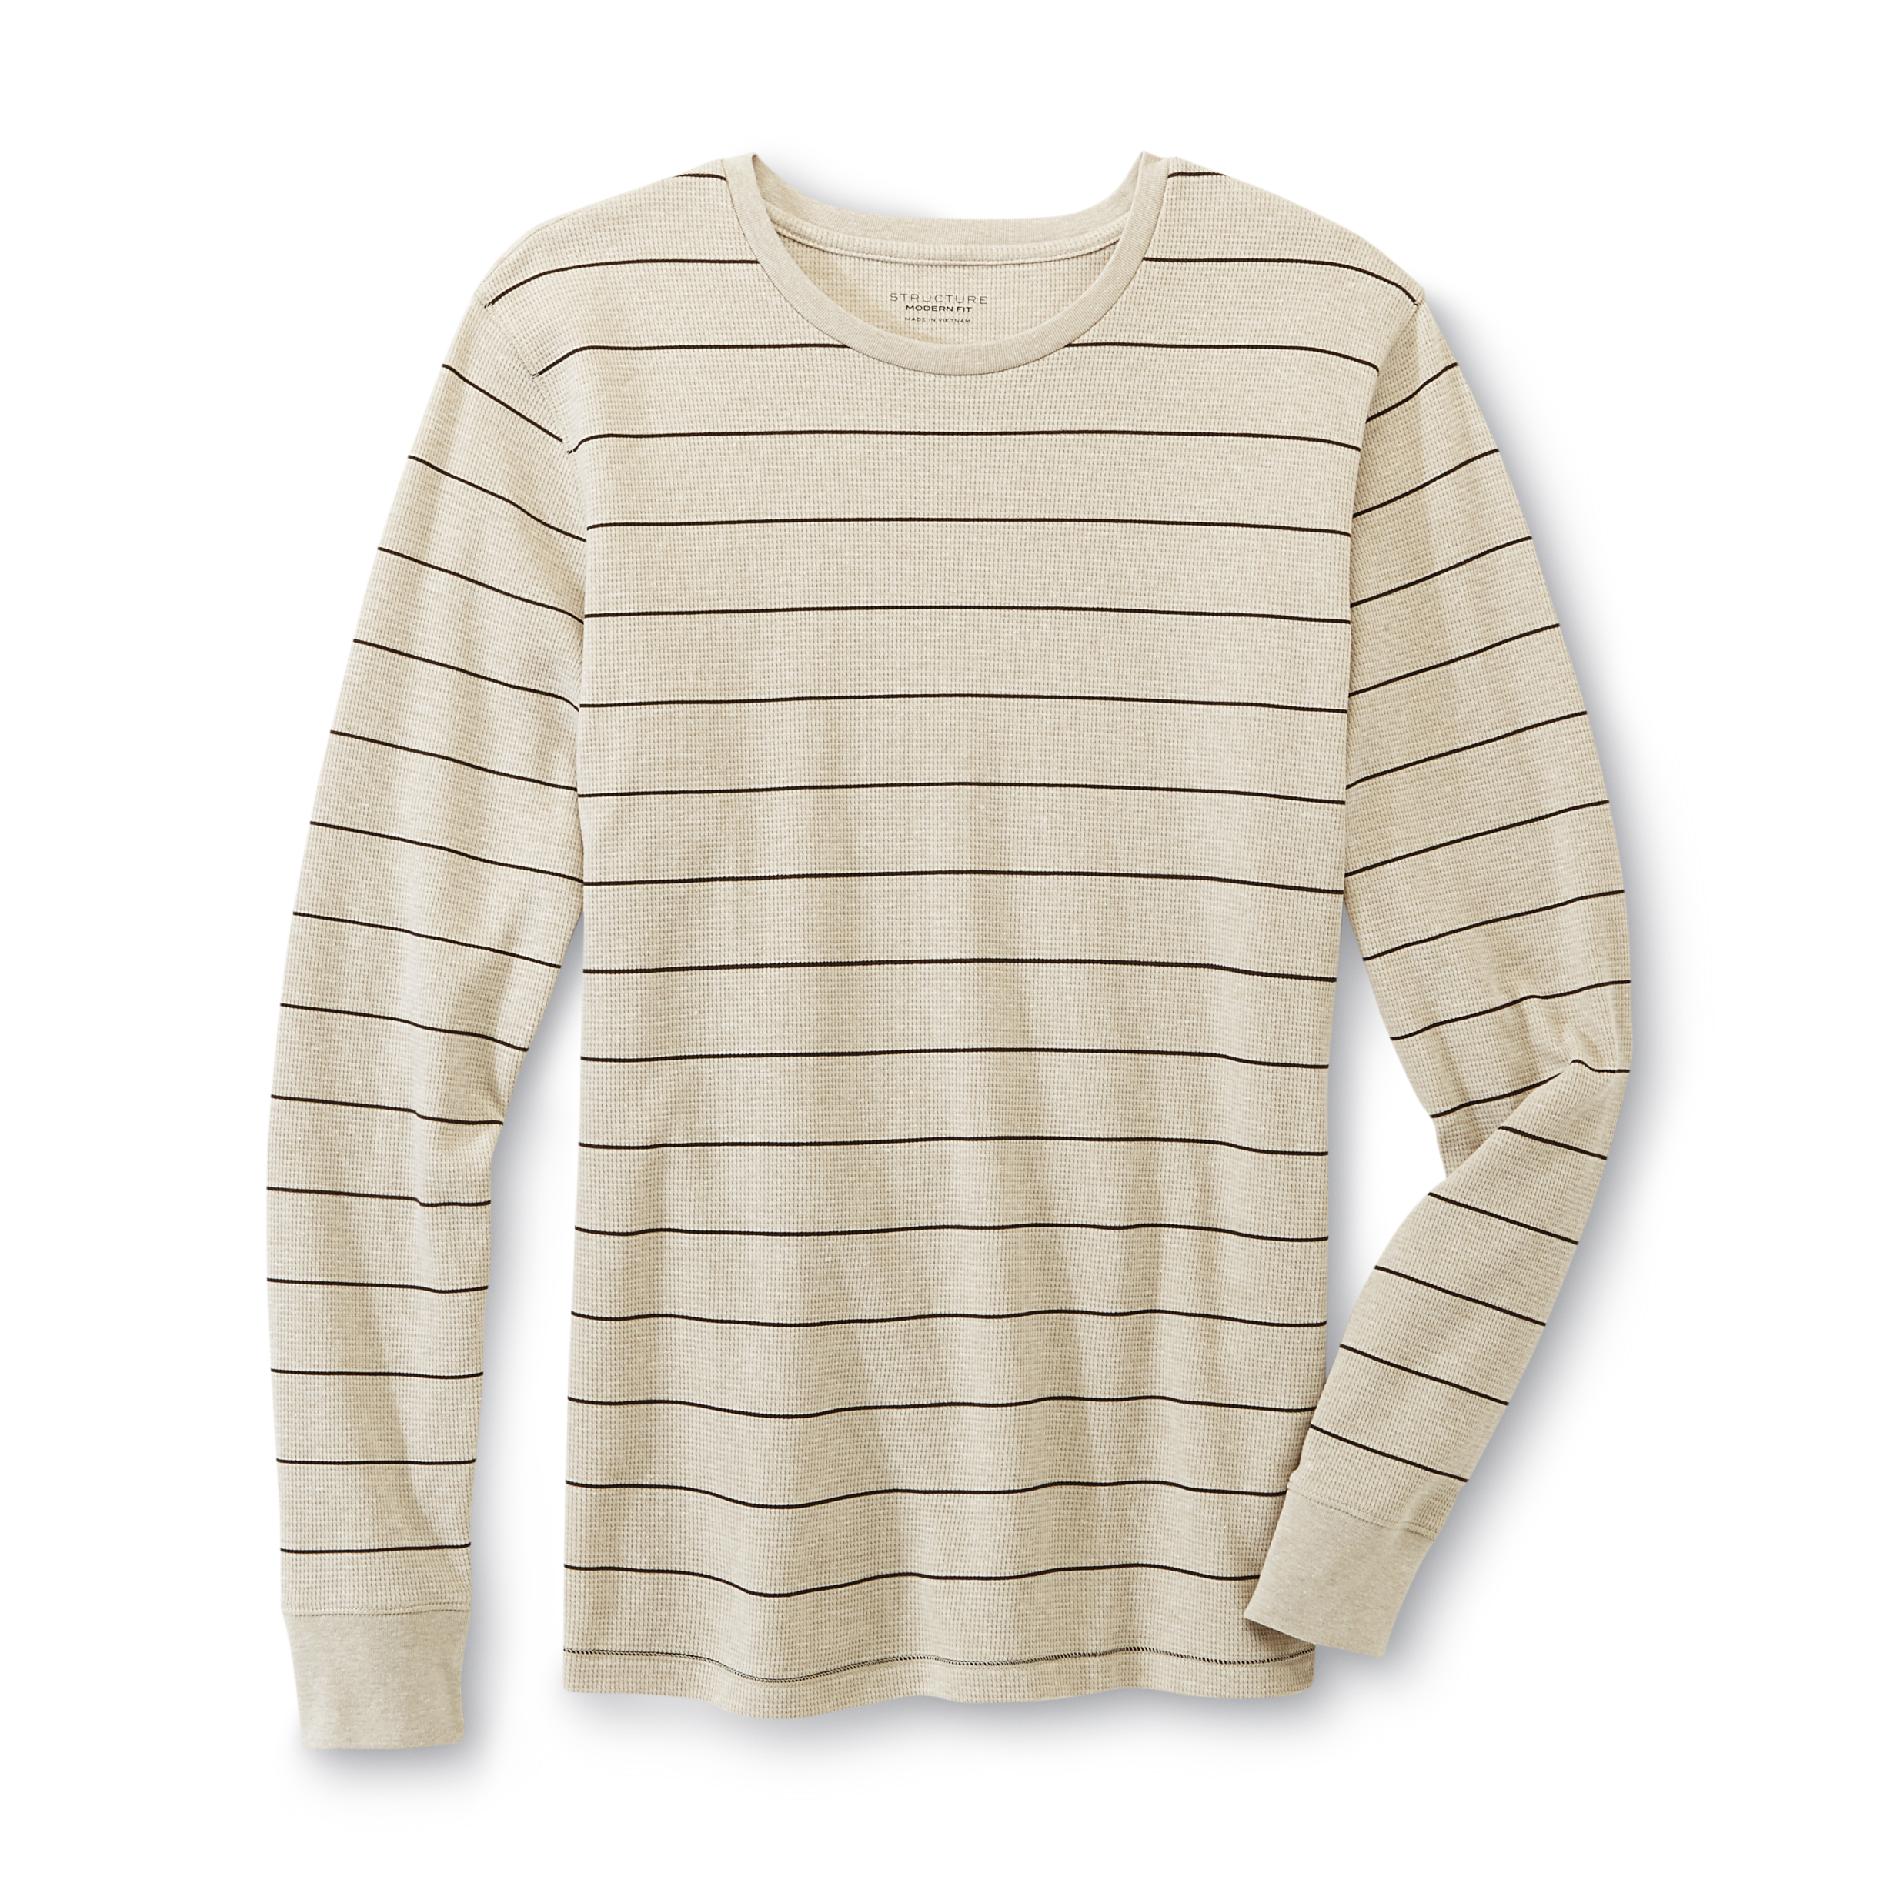 Structure Men's Thermal T-Shirt - Striped